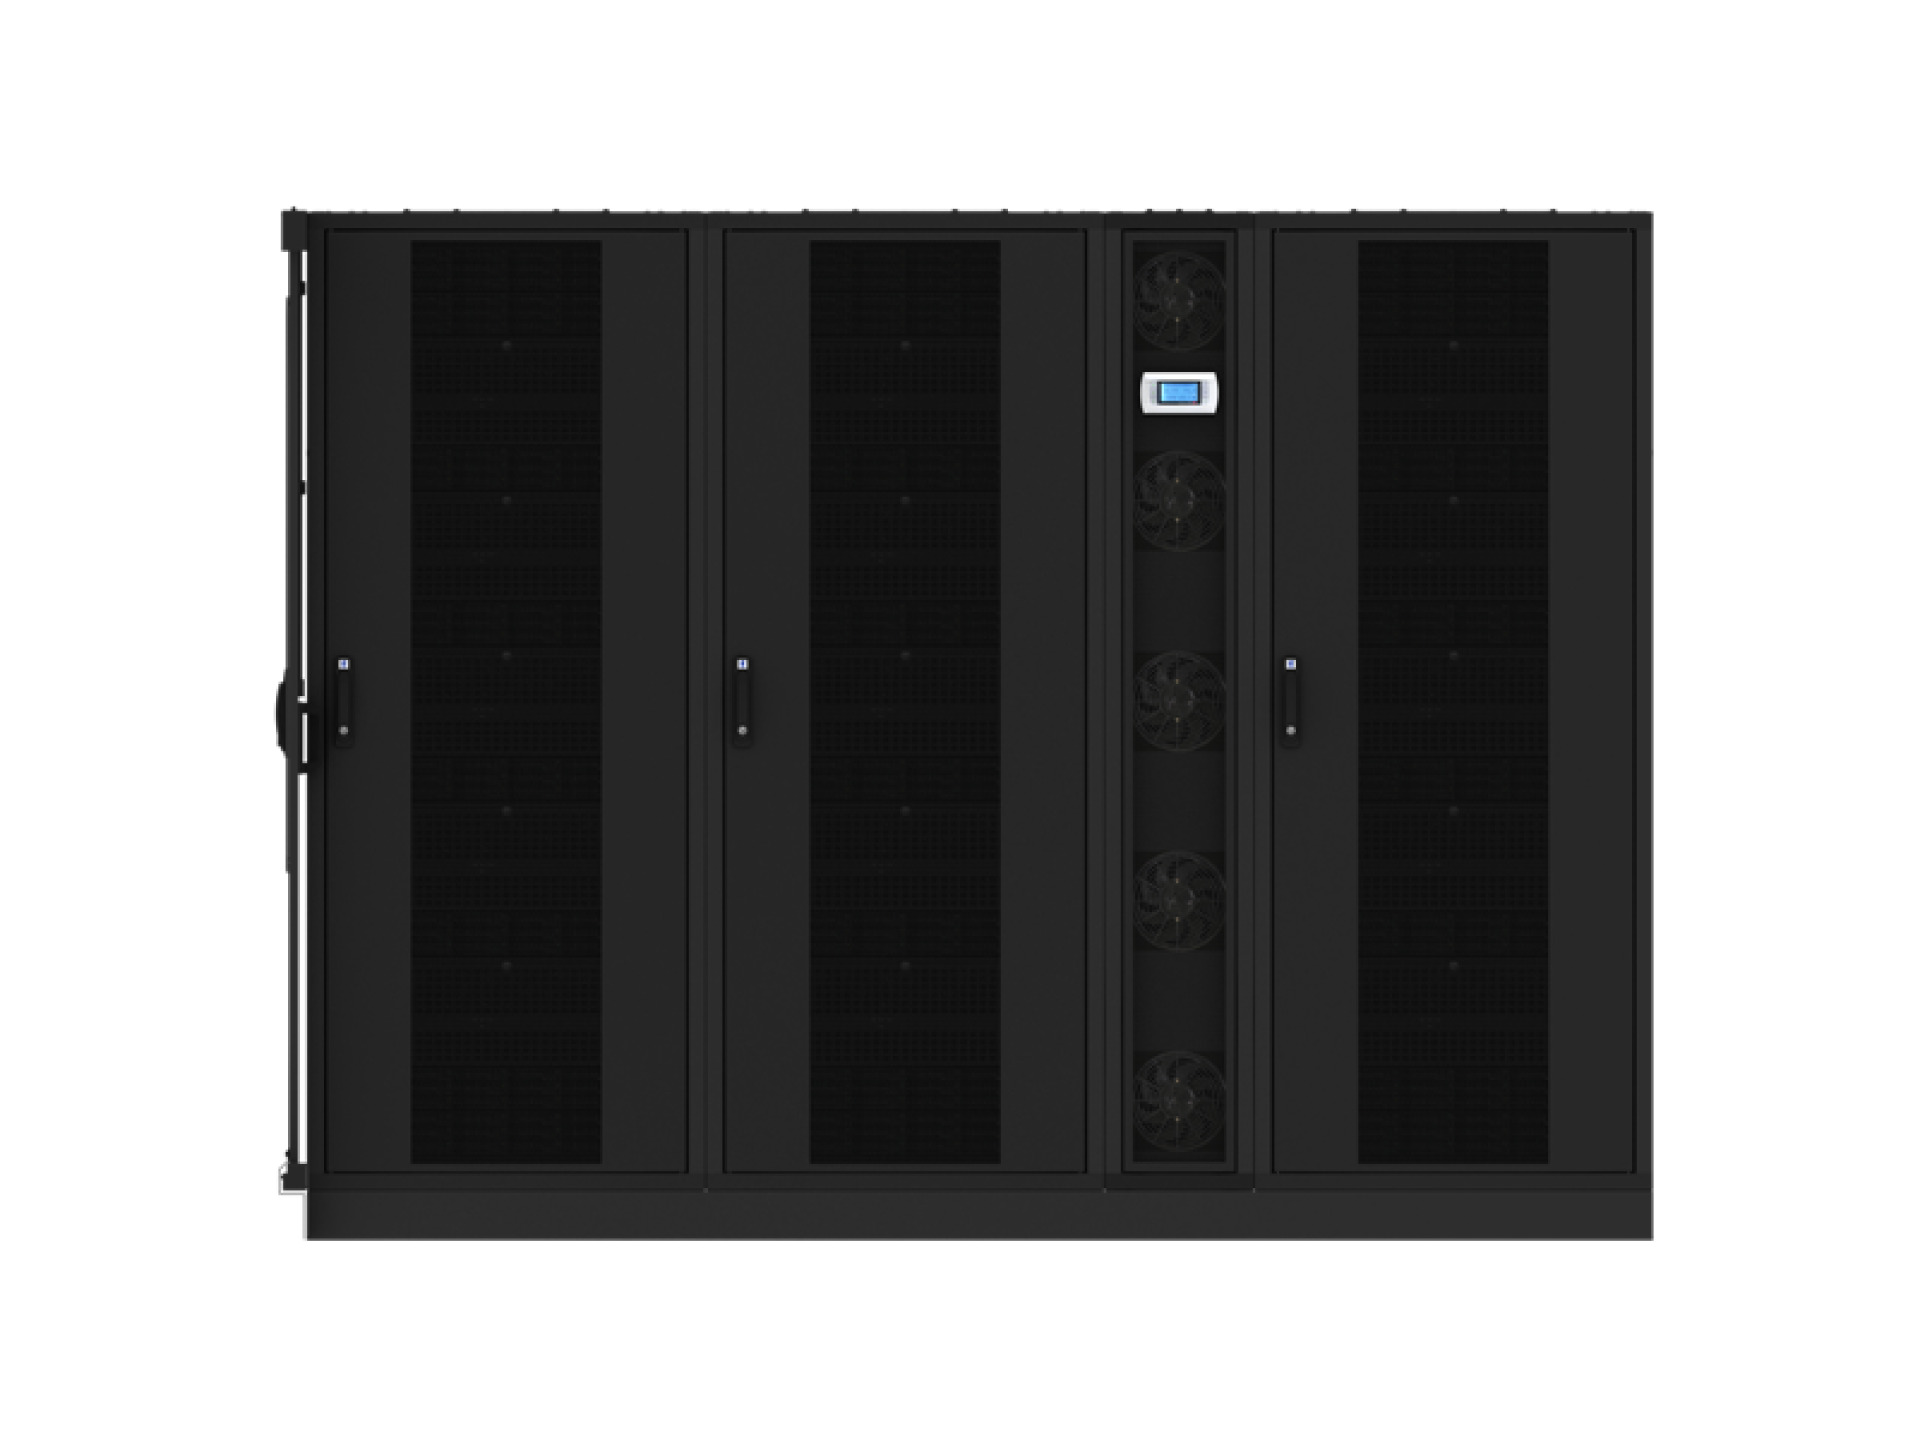 In-Row Cooler 42U, 300x1000, 4.4 / 8 kW, DX1, RAL9005